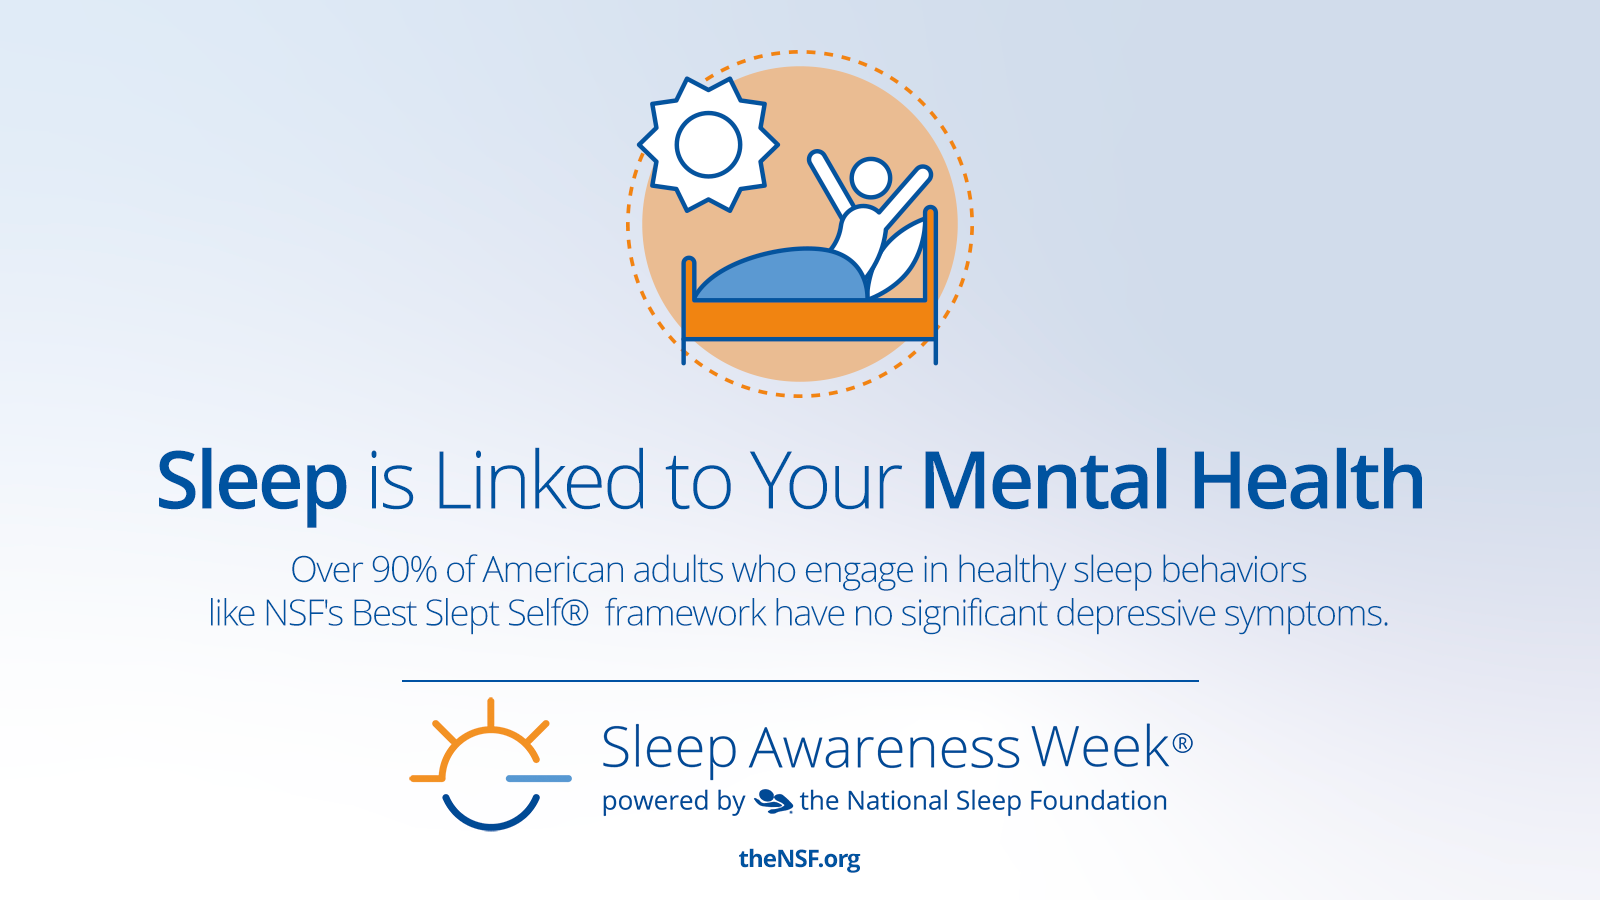 How is Your Sleep Health Linked to Your Mental Health?